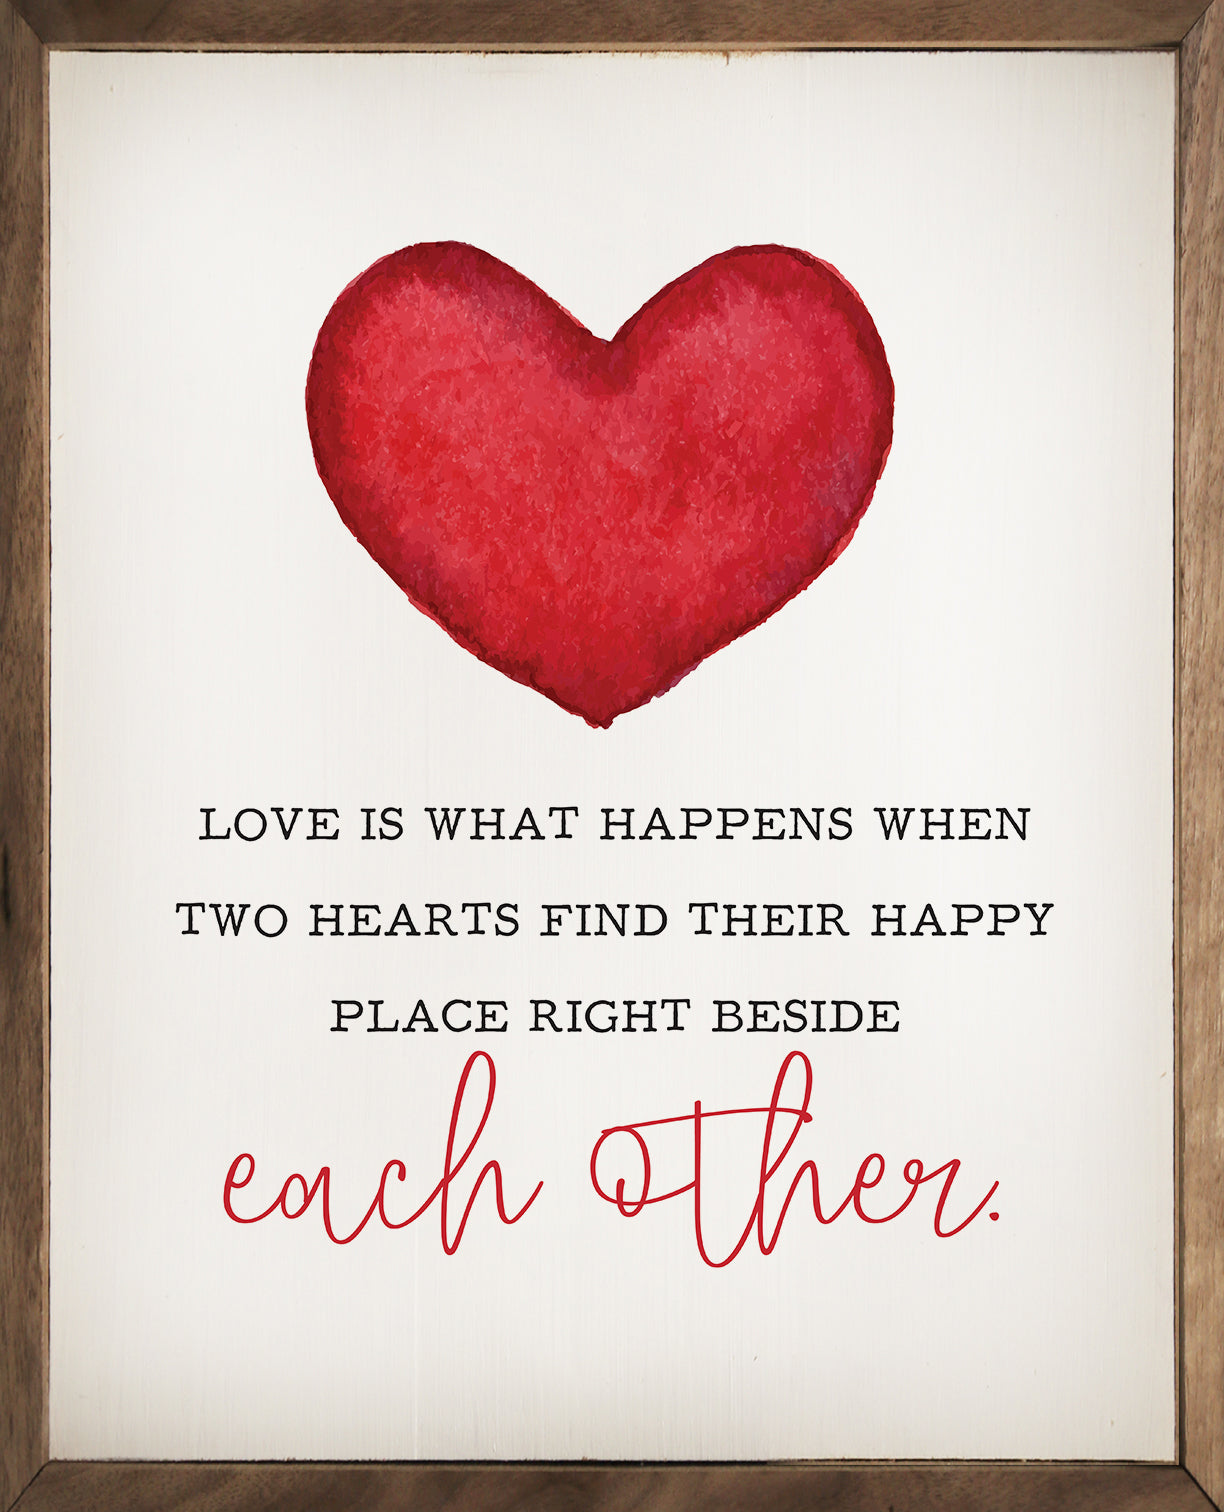 Love is what happens